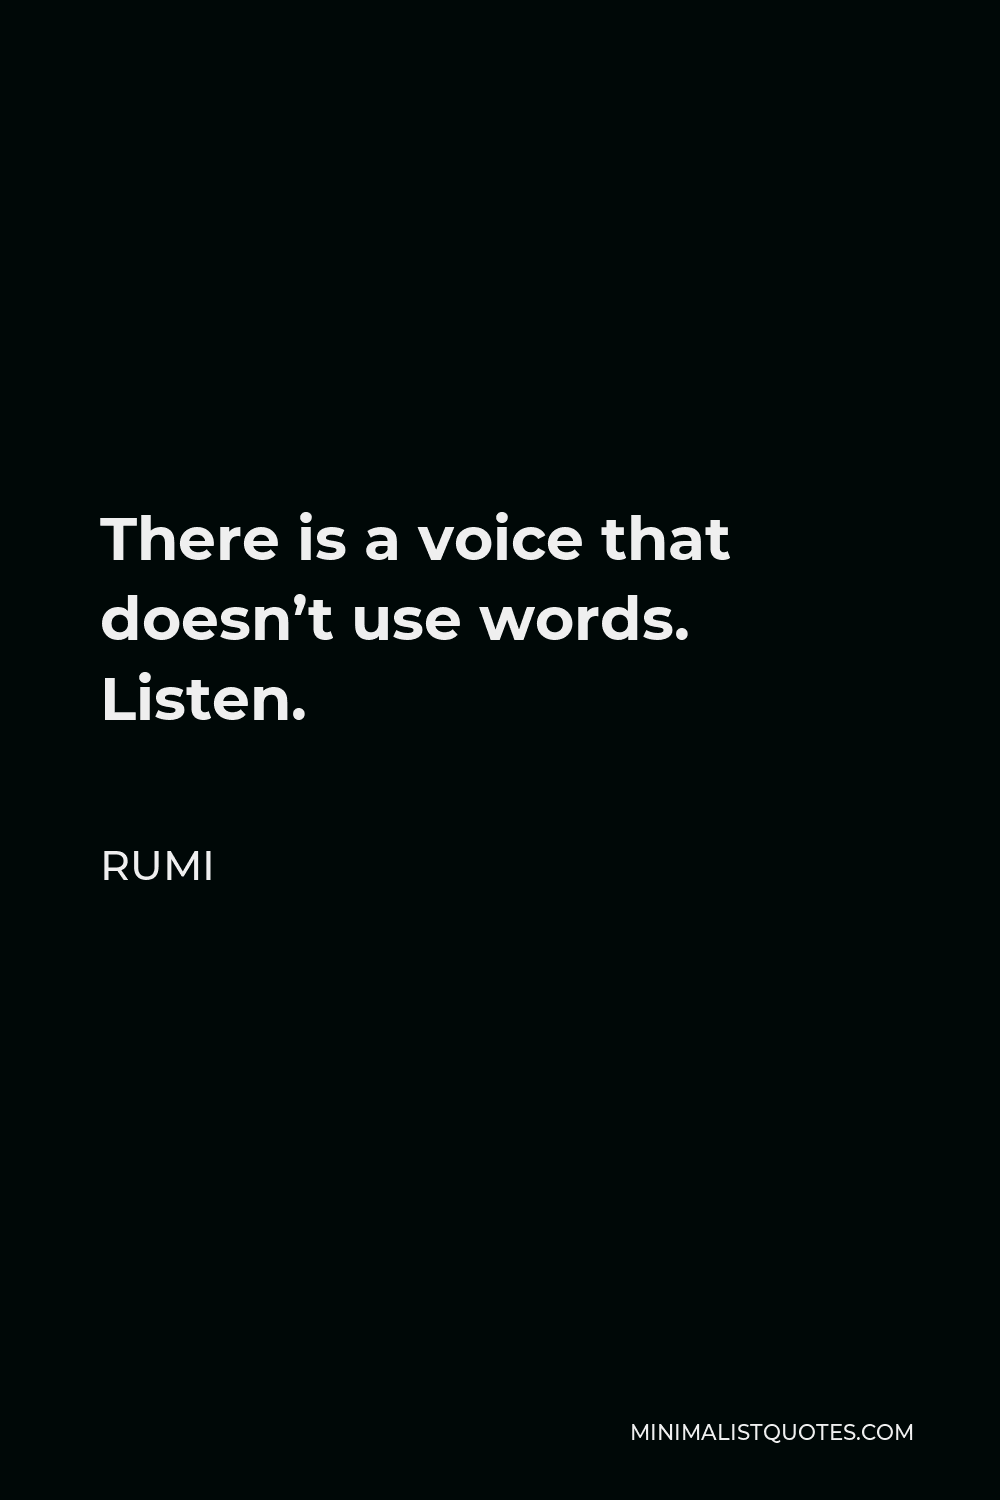 Rumi Quote - There is a voice that doesn’t use words. Listen.